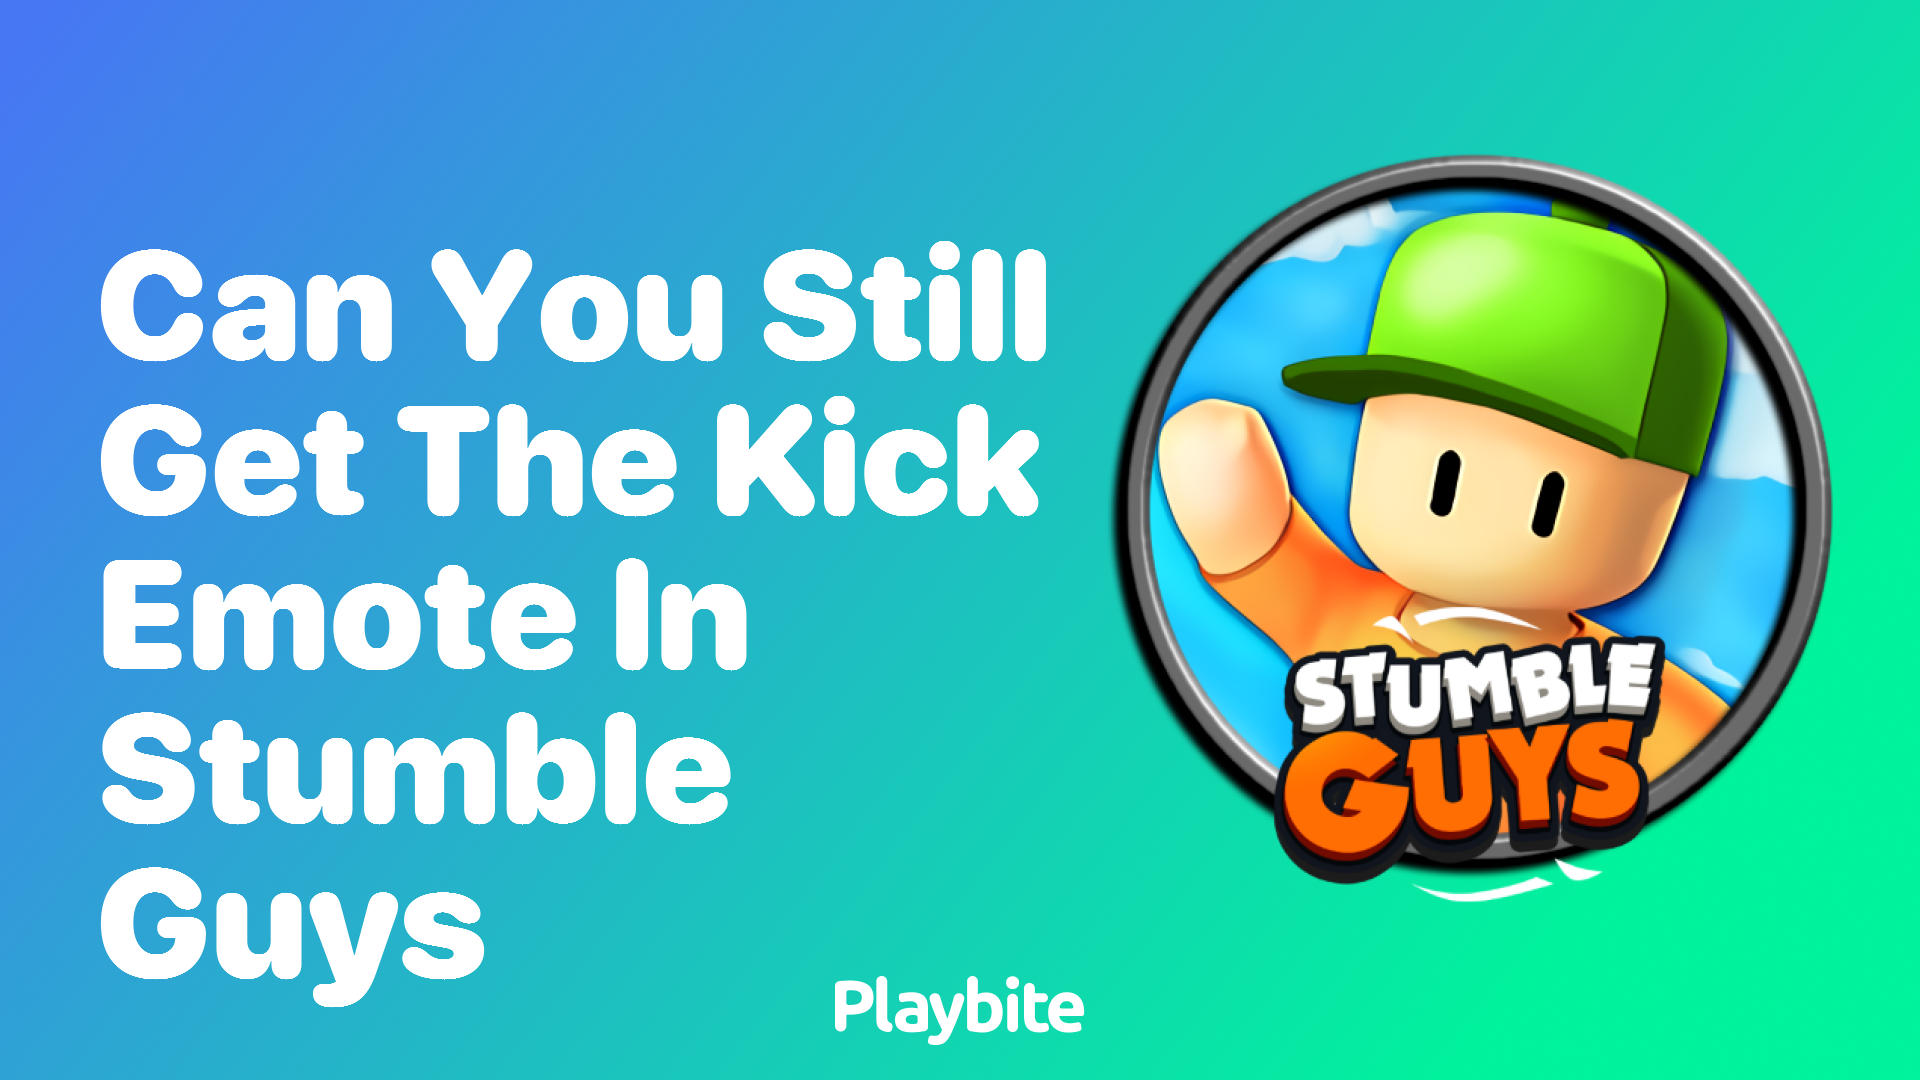 Can You Still Get the Kick Emote in Stumble Guys?